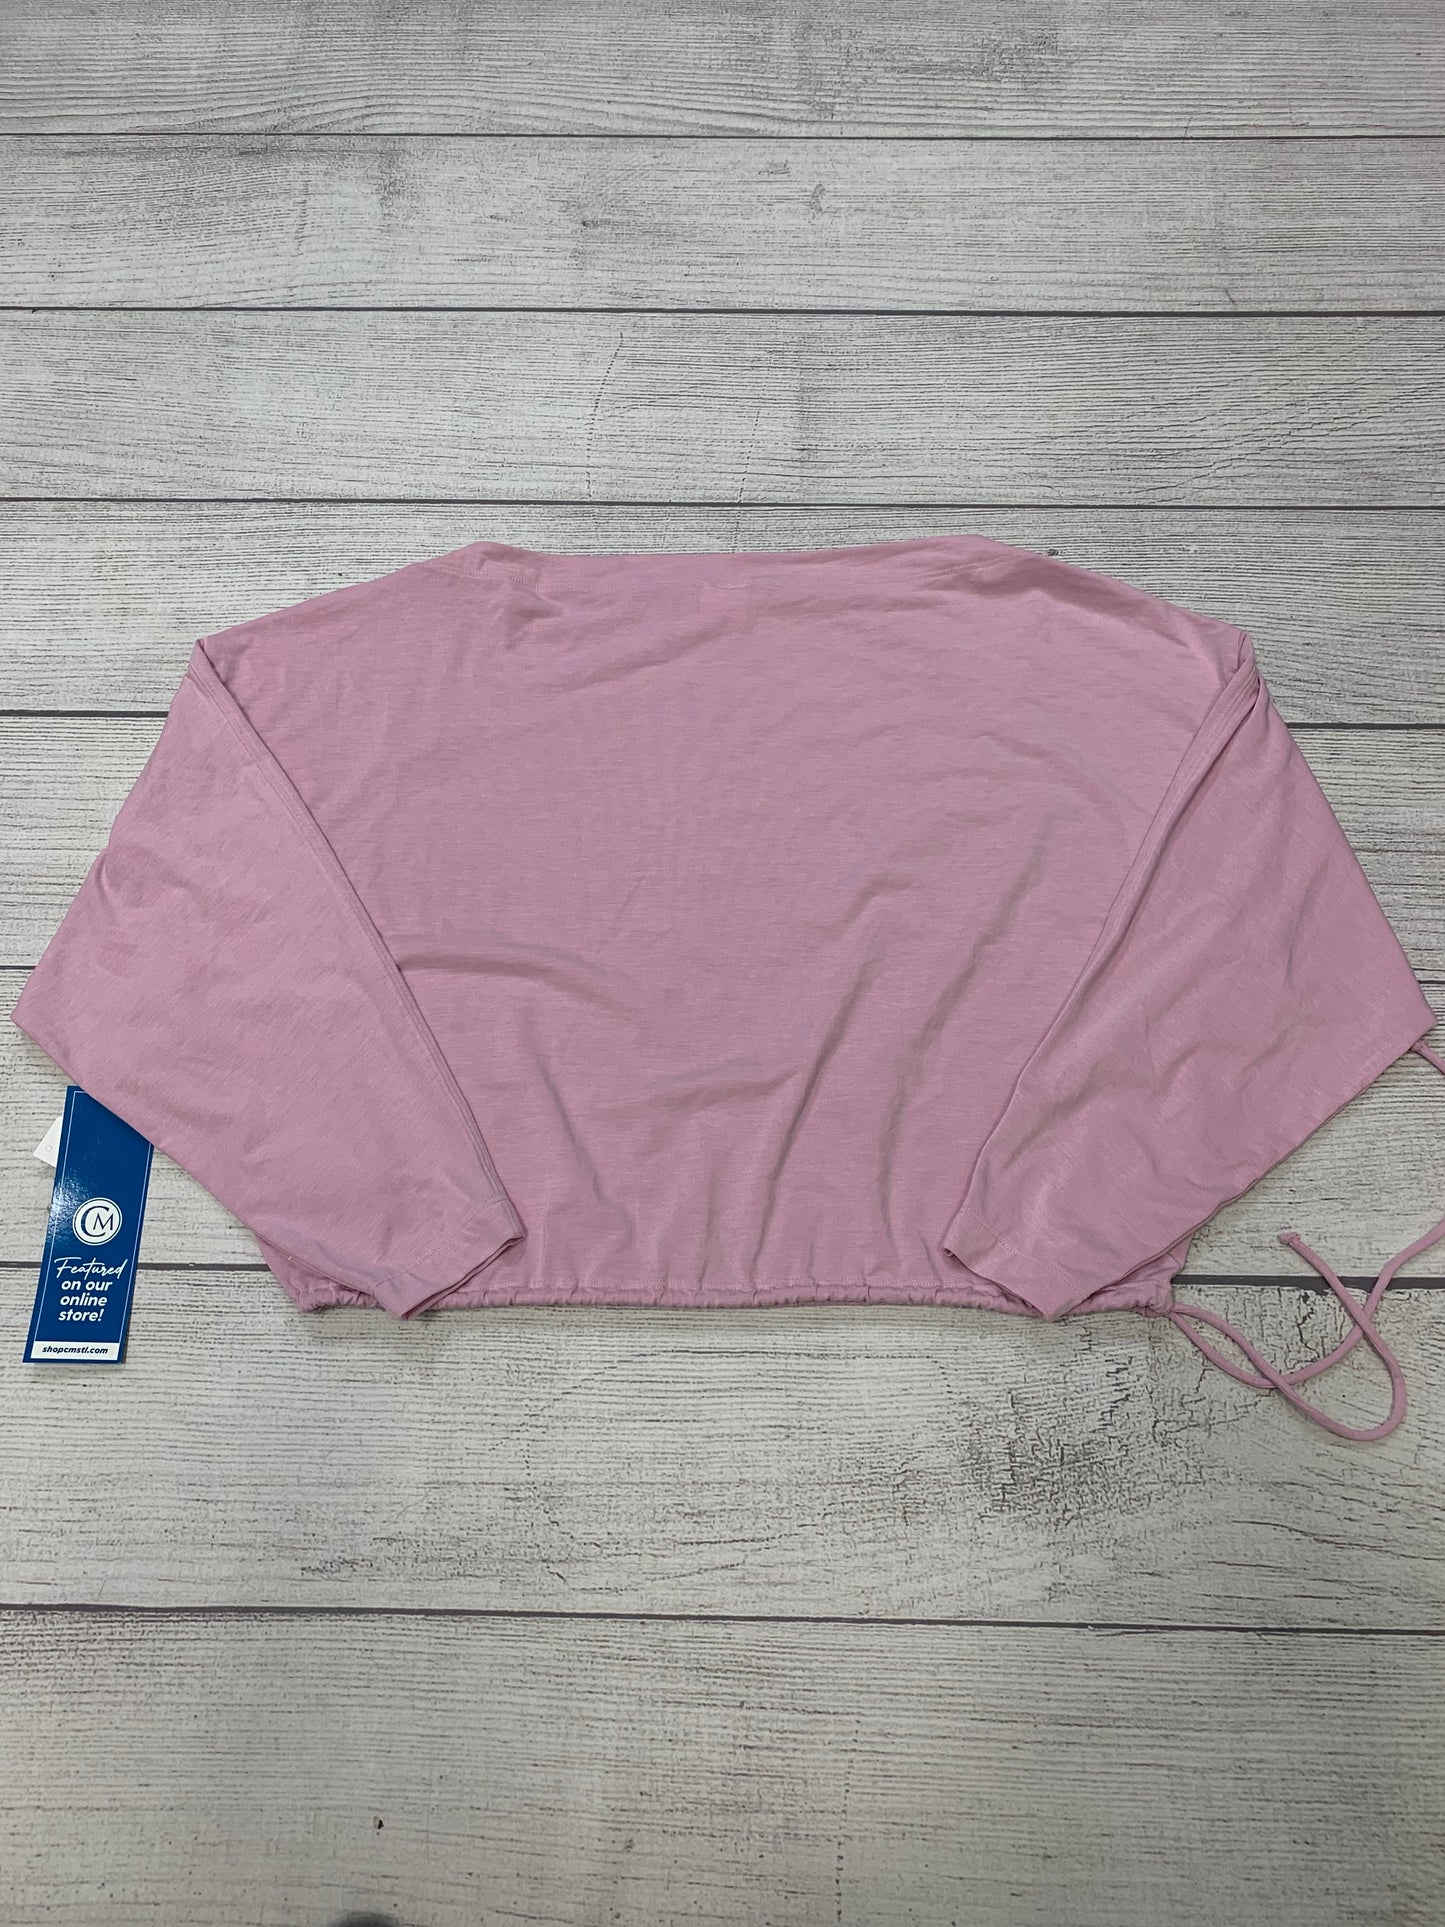 Pink Athletic Top Long Sleeve Collar Athleta, Size M